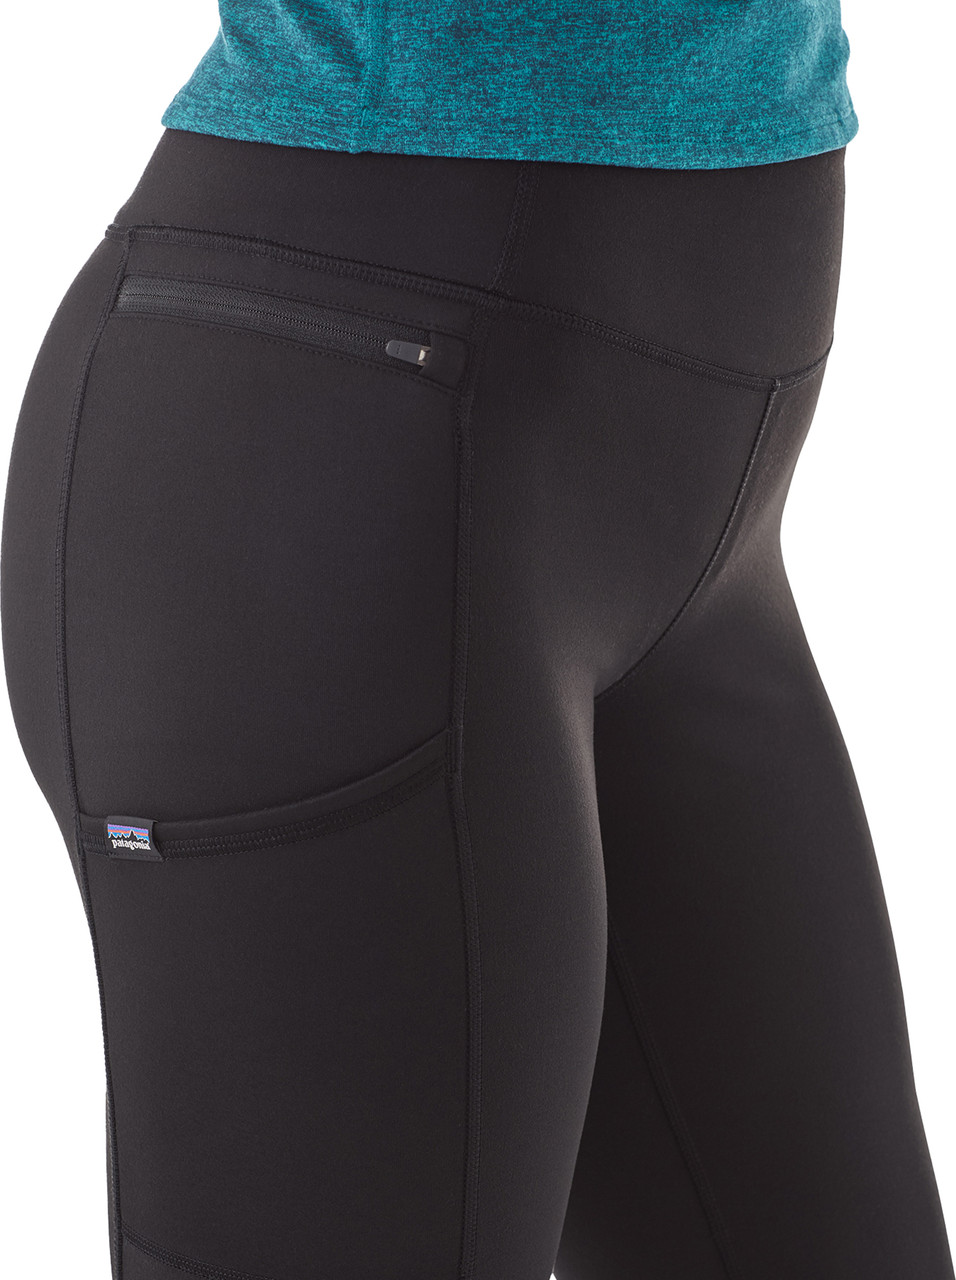 Patagonia Pack Out Tights - Women's | MEC